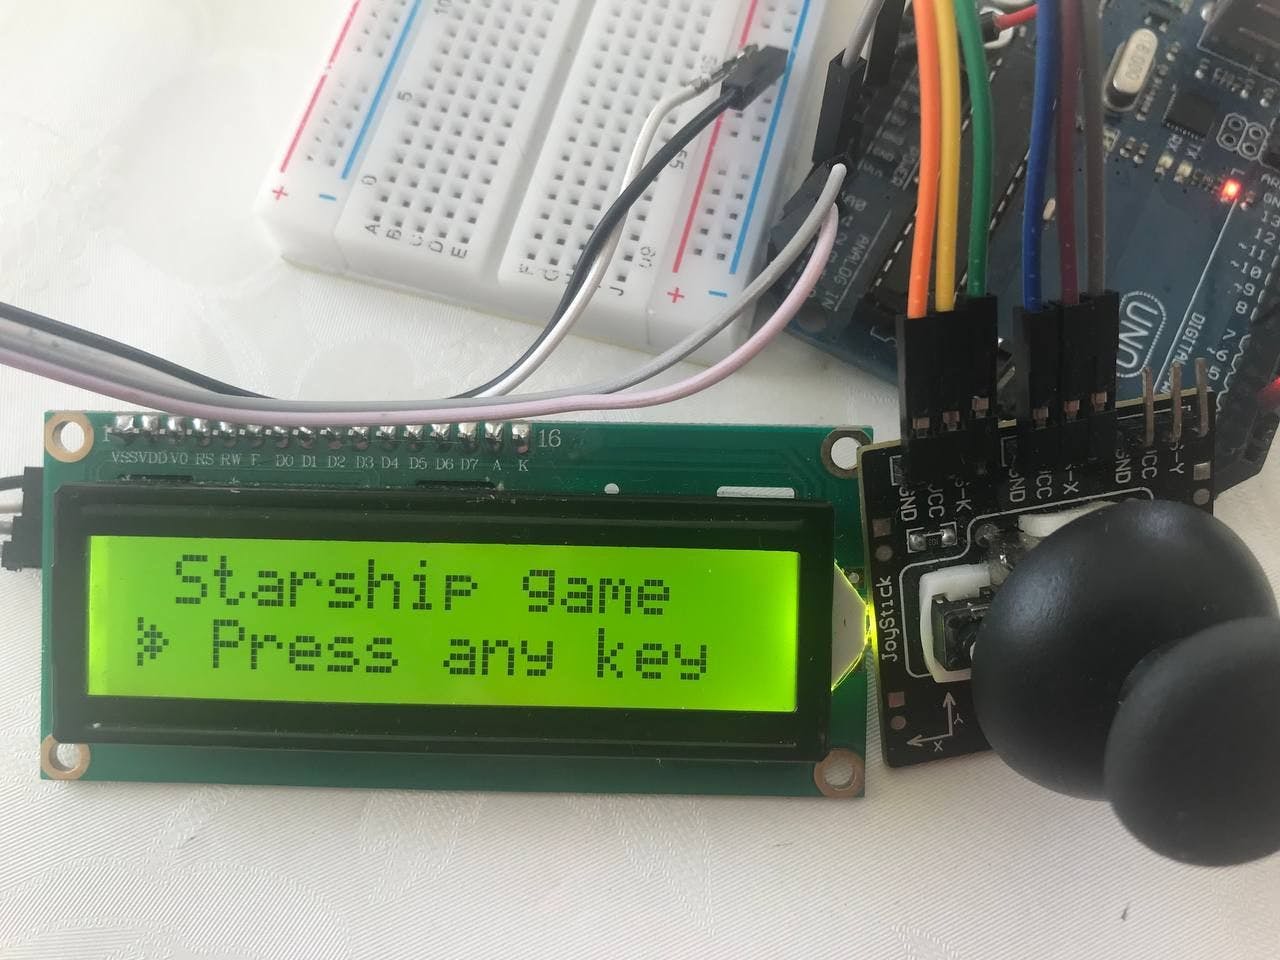 /how-to-build-an-arduino-starship-game-controlled-by-joystick-and-computer feature image